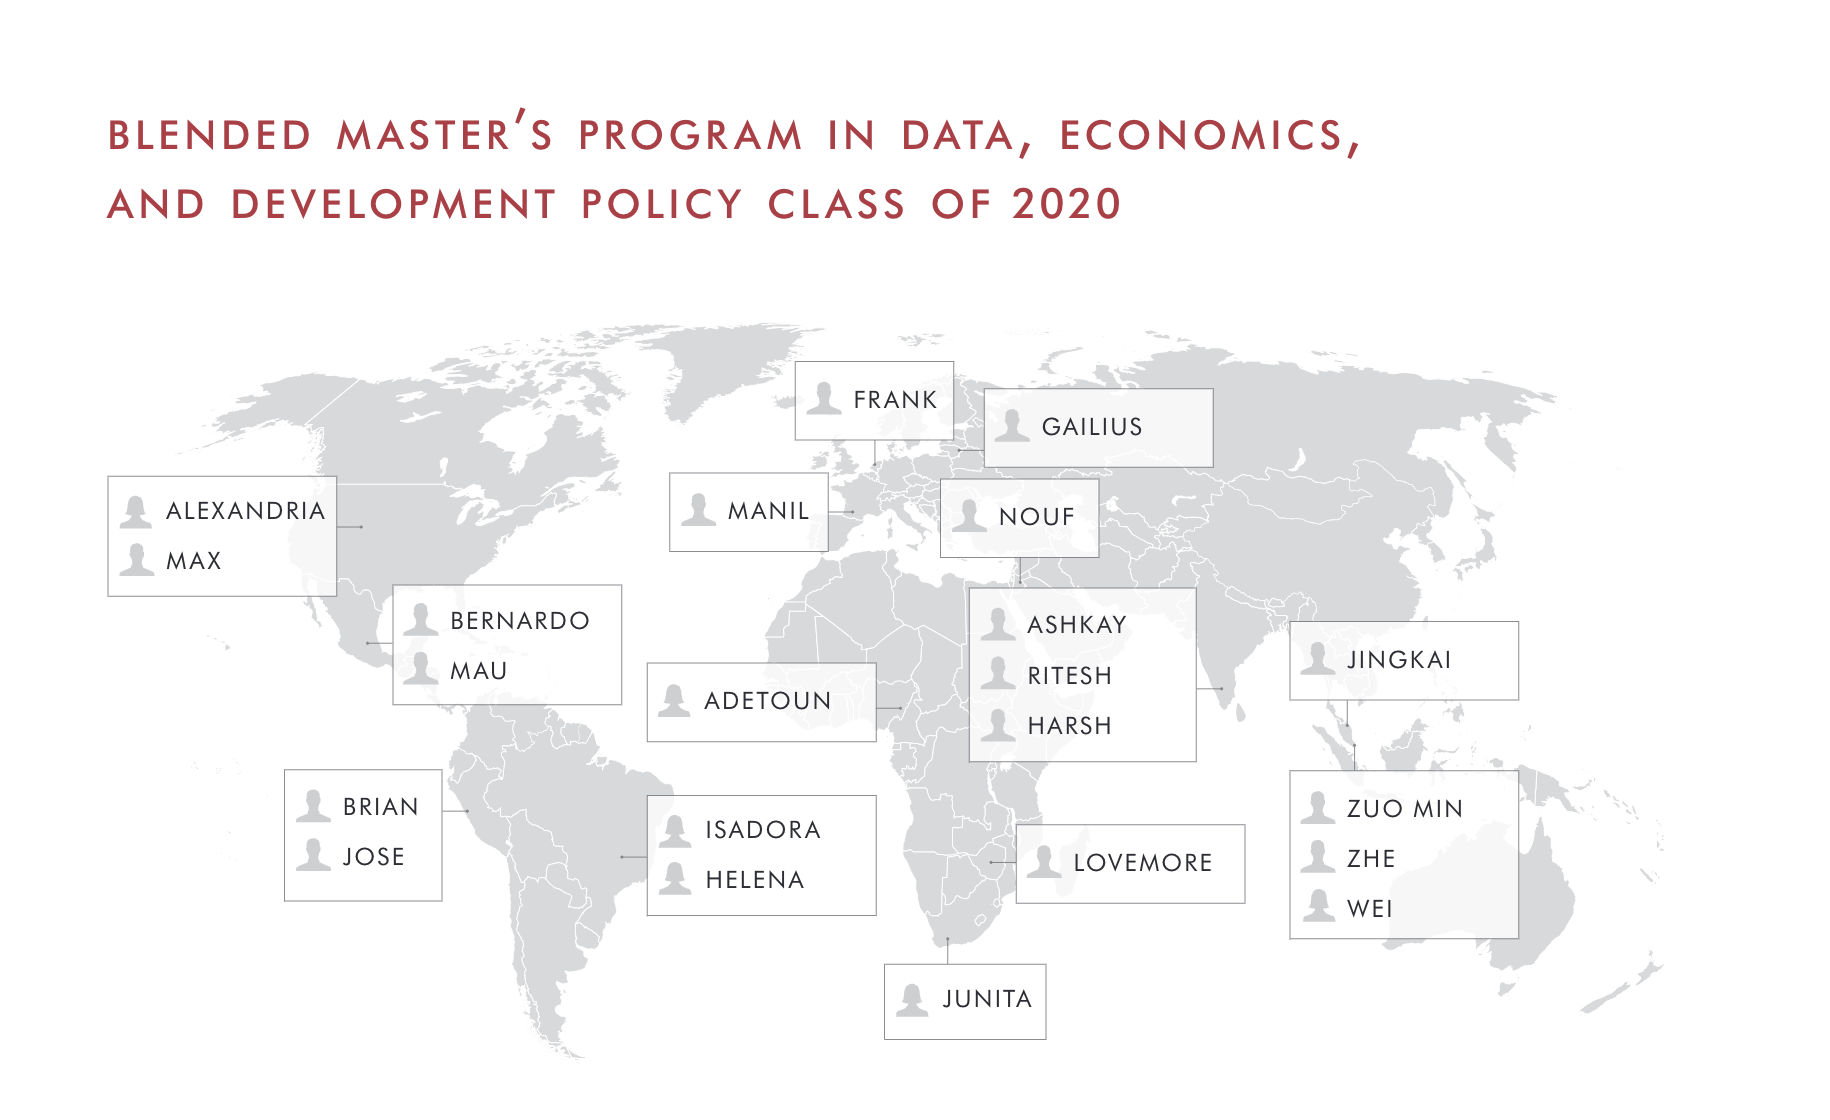 Map of home countries of 2020 DEDP students